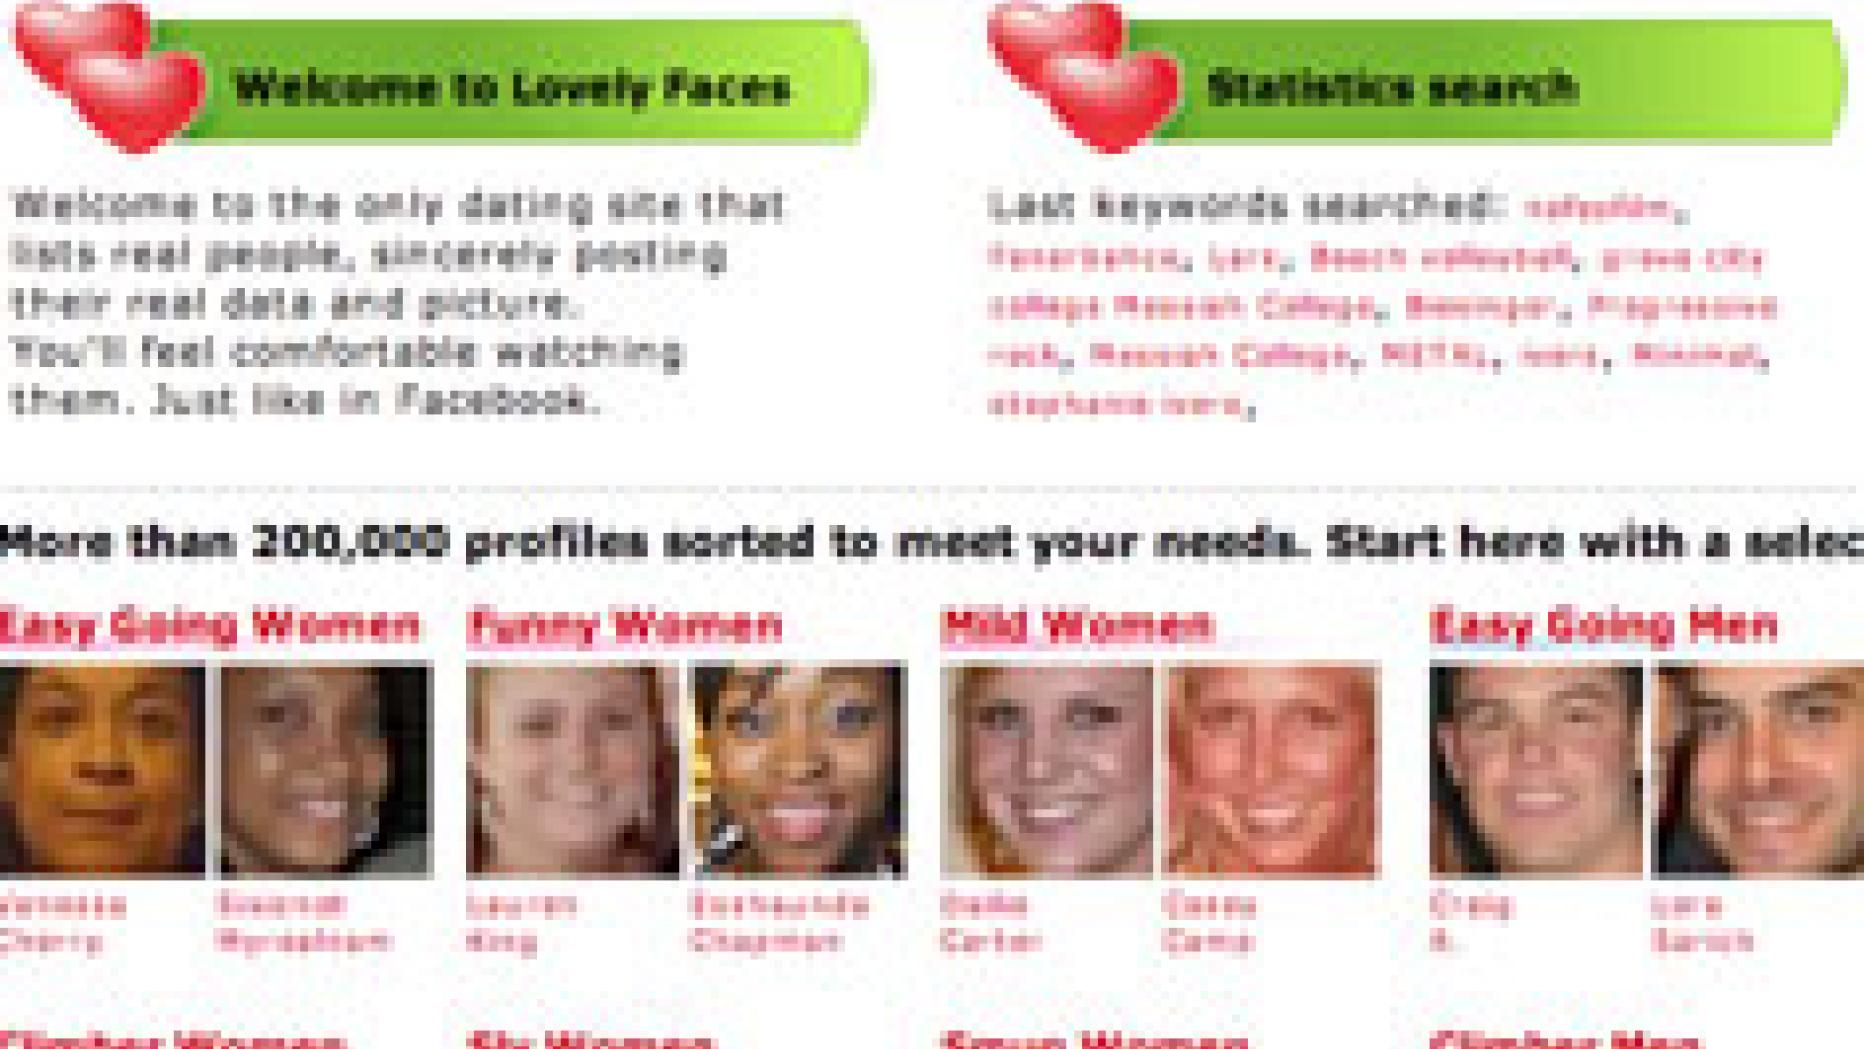 Dating up перевод. Dating site profile. Faces to Love.